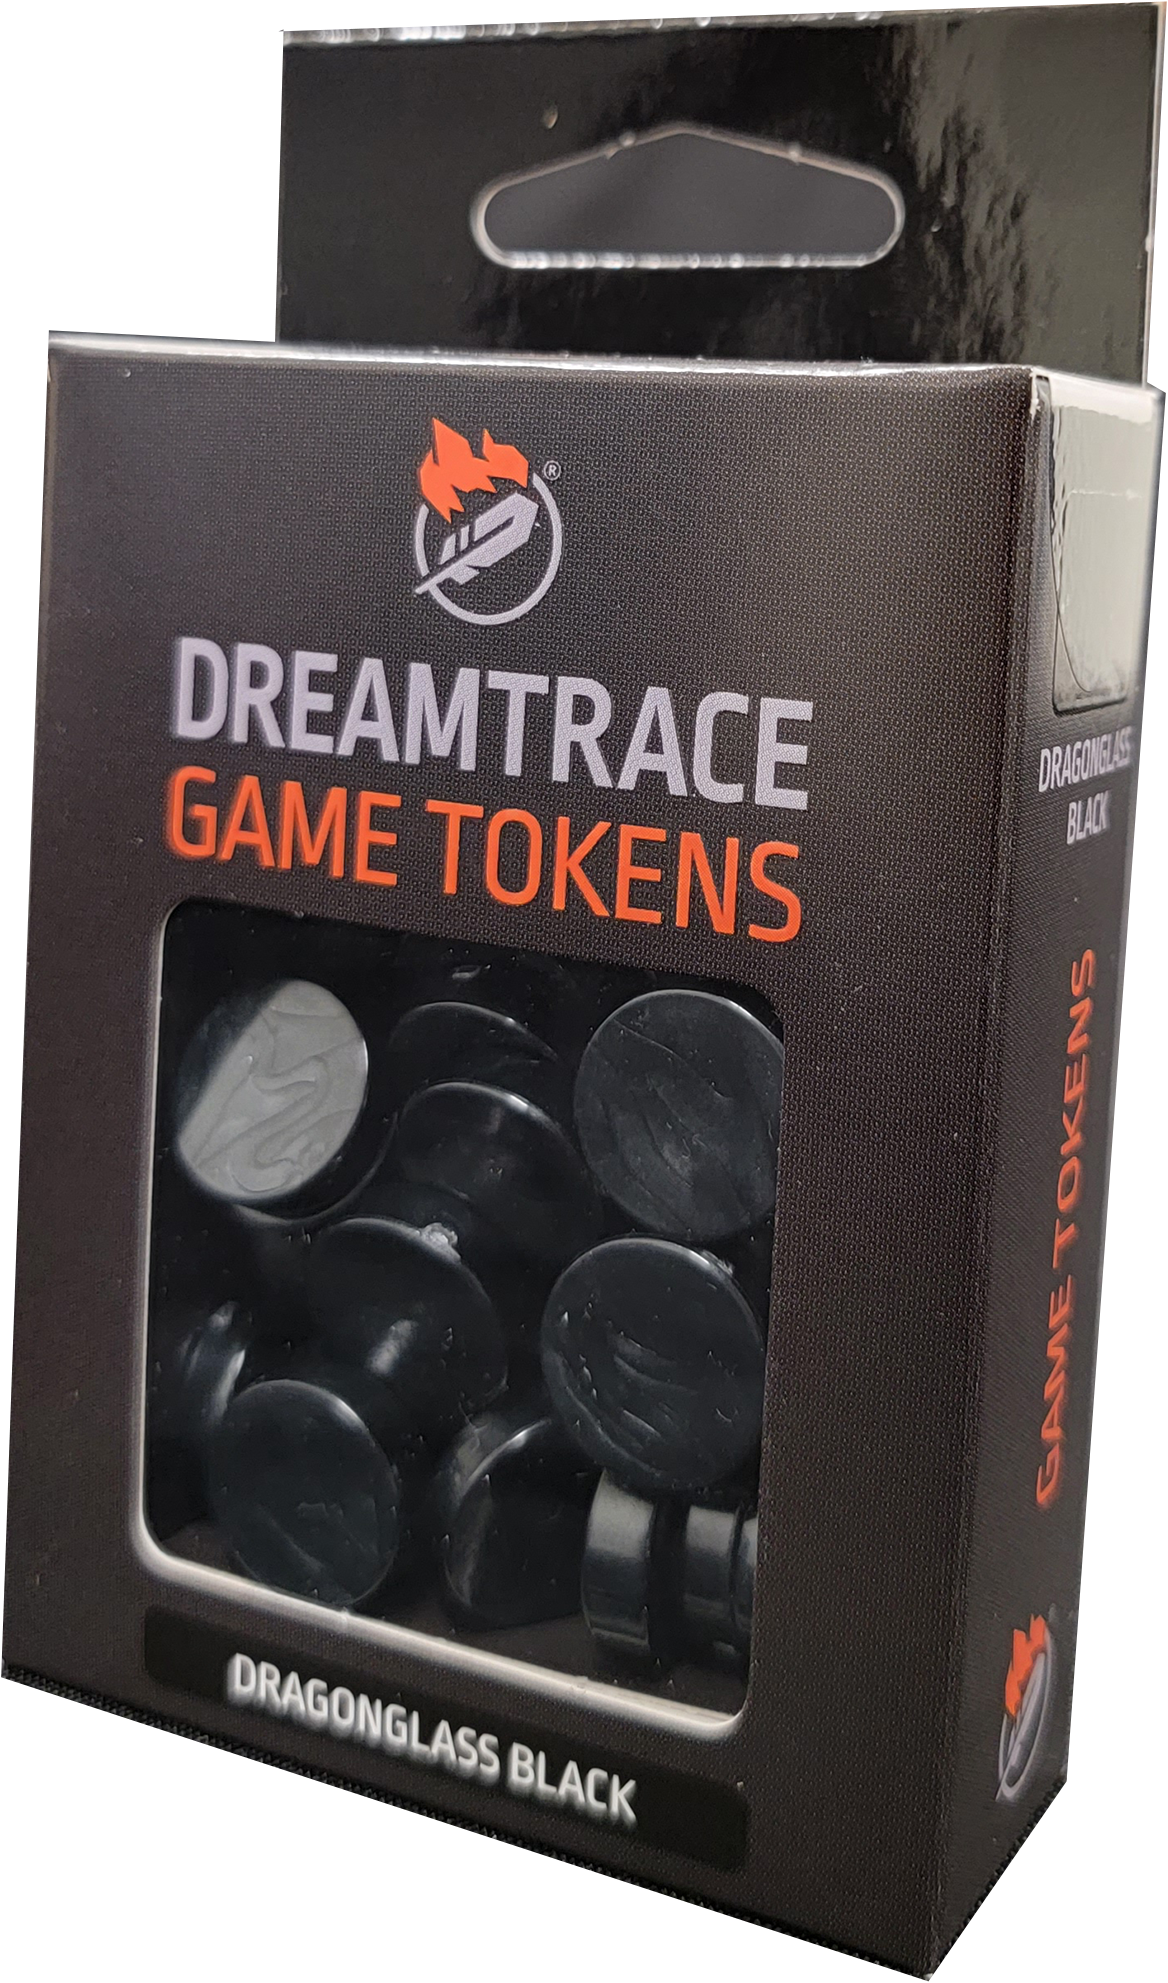 Dreamtrace Gaming Tokens: Dragonglass Black 